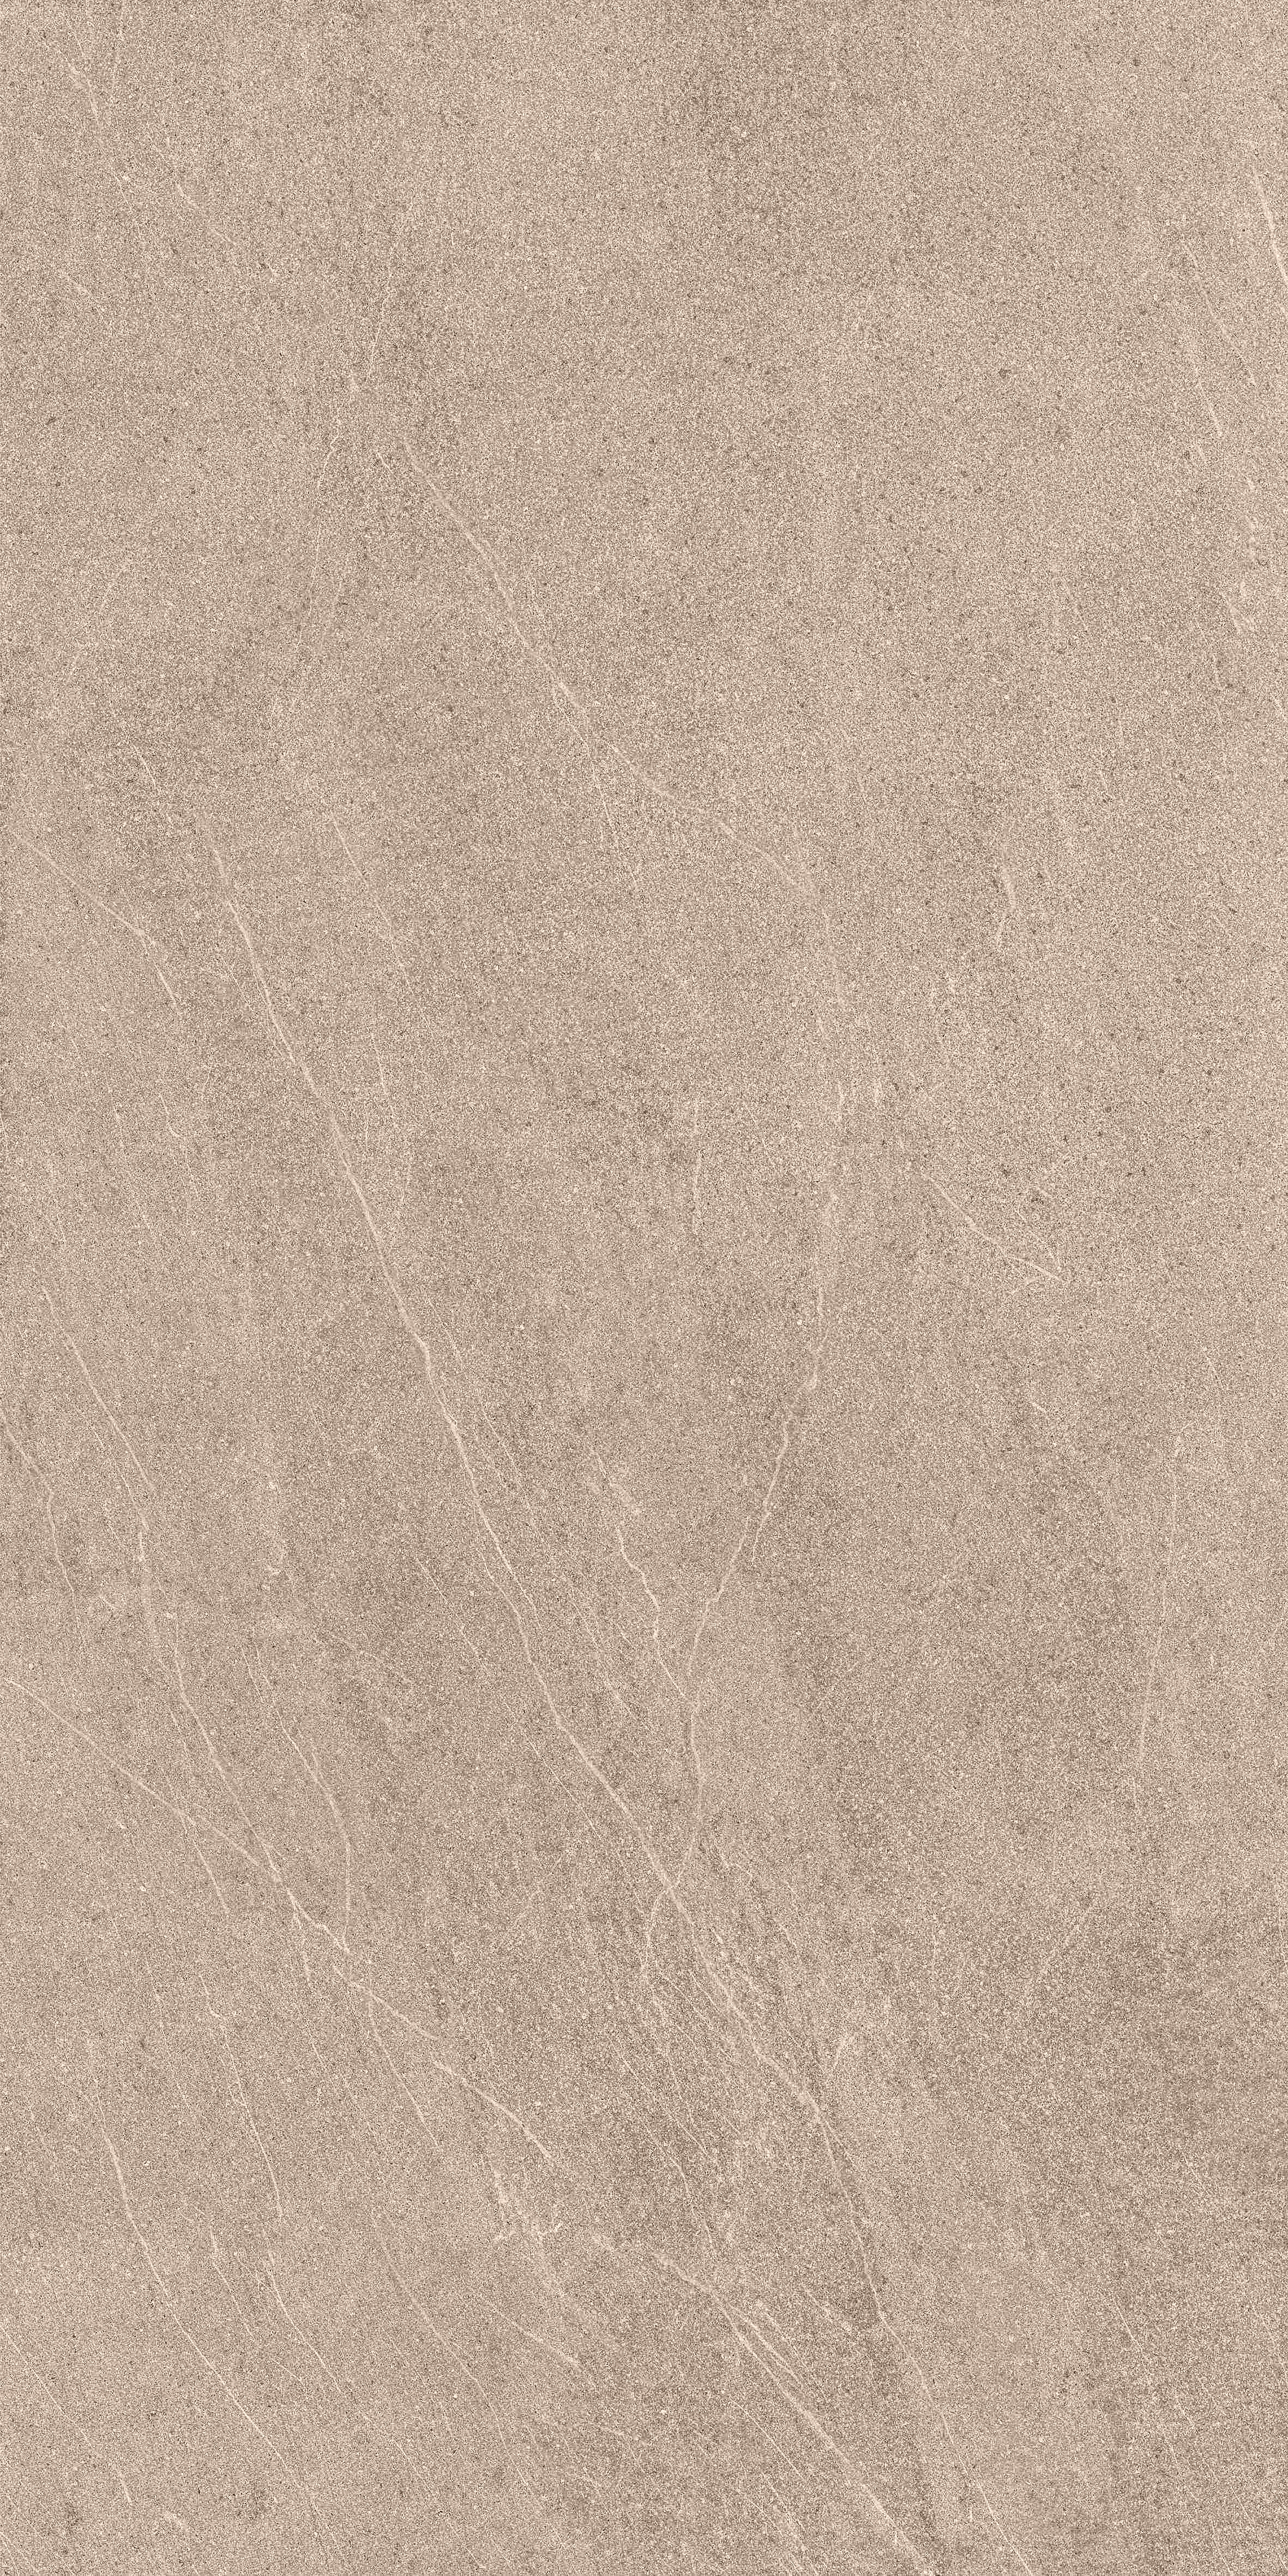 Lea Nextone Taupe Naturale – Antibacterial LGXNX20 60x120cm rectified 9,5mm